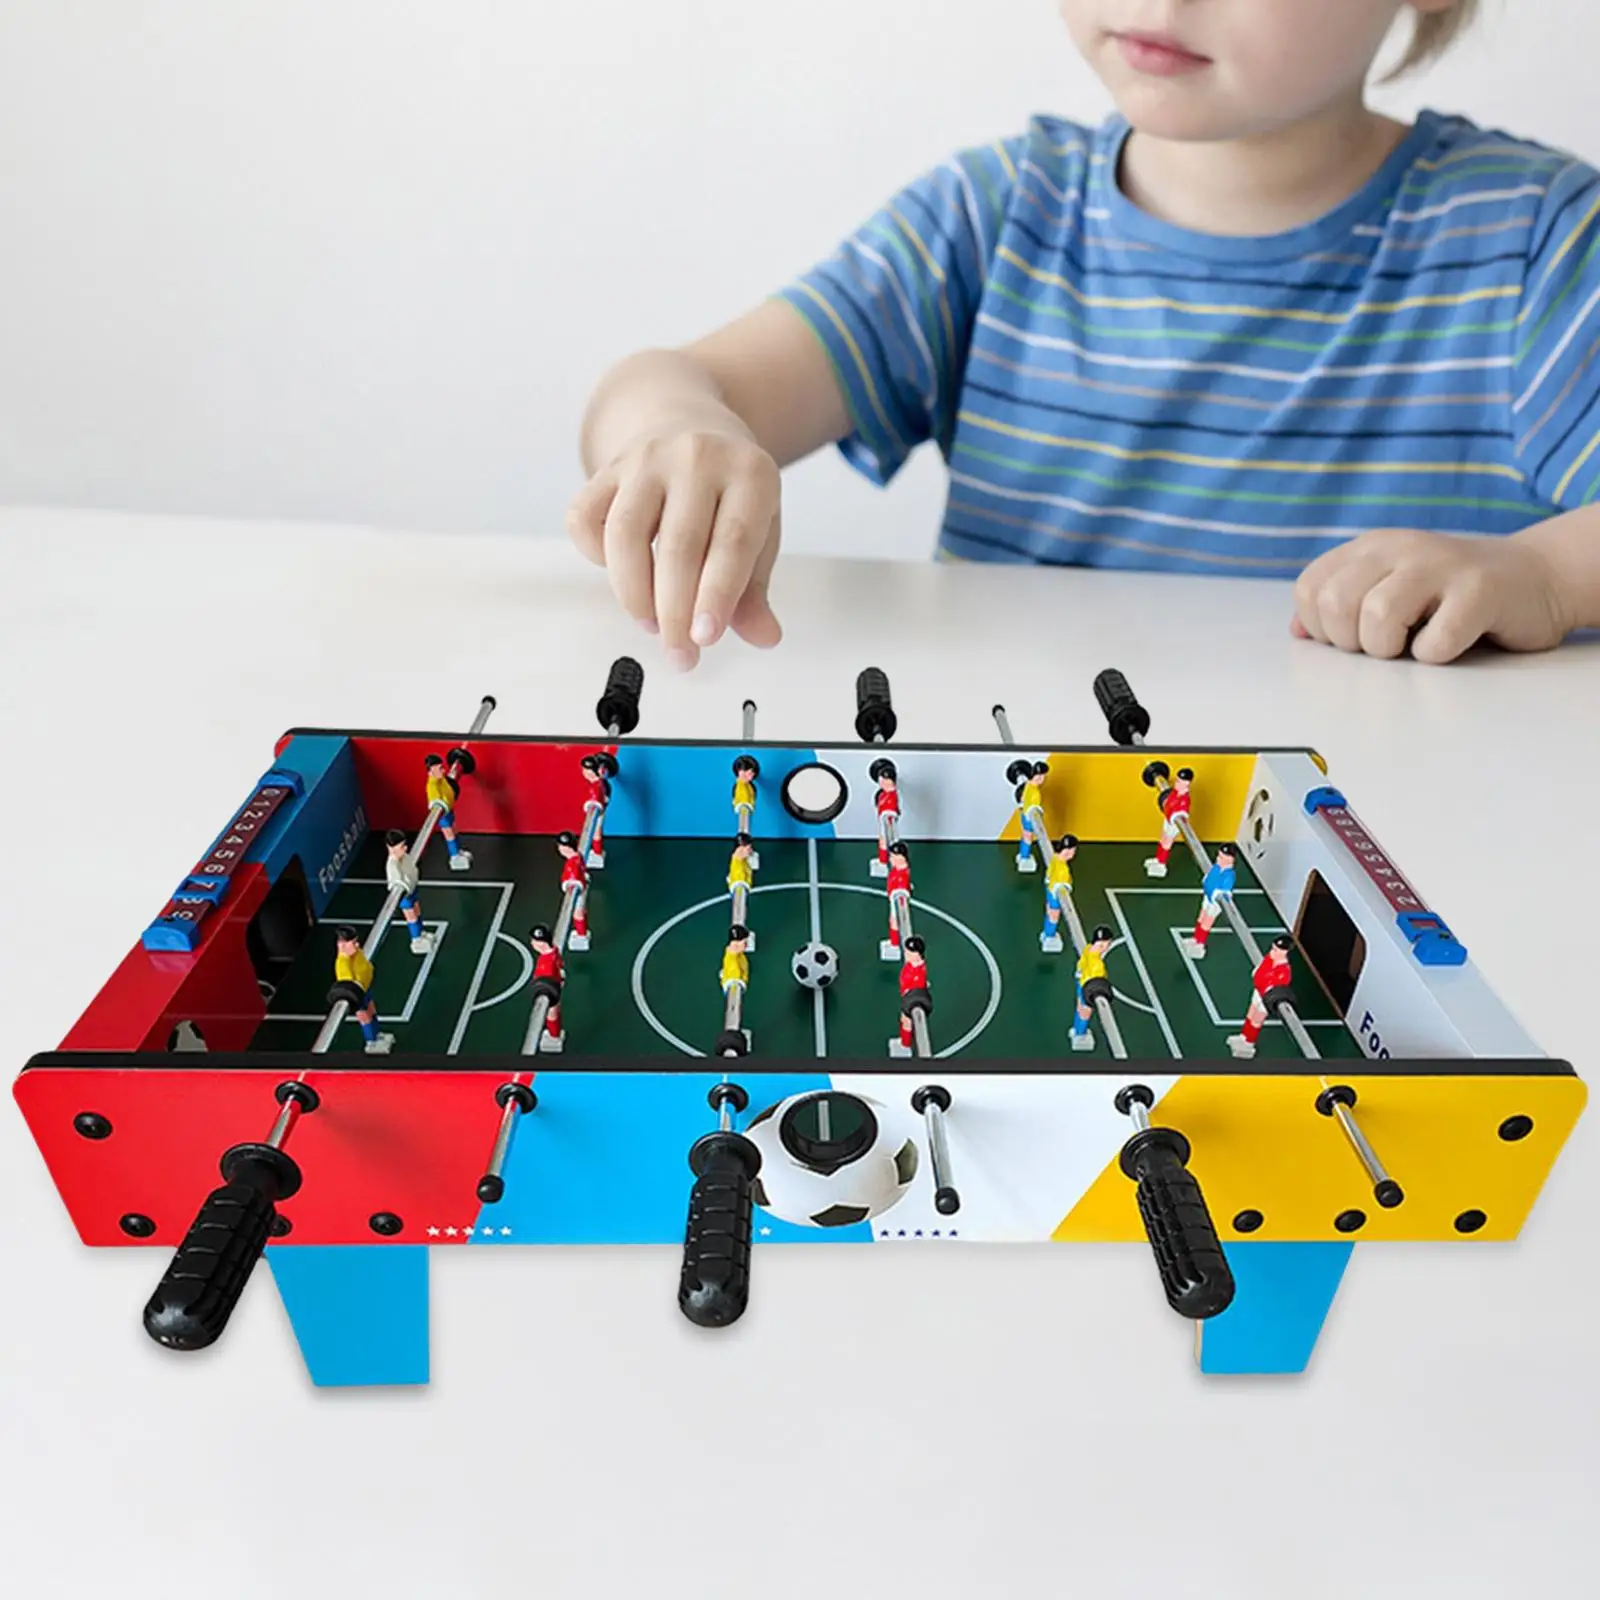 Portable Foosball Table Easy to Store Educational Toys Interactive Tabletop Football Games for Game Rooms Holiday Gifts Children